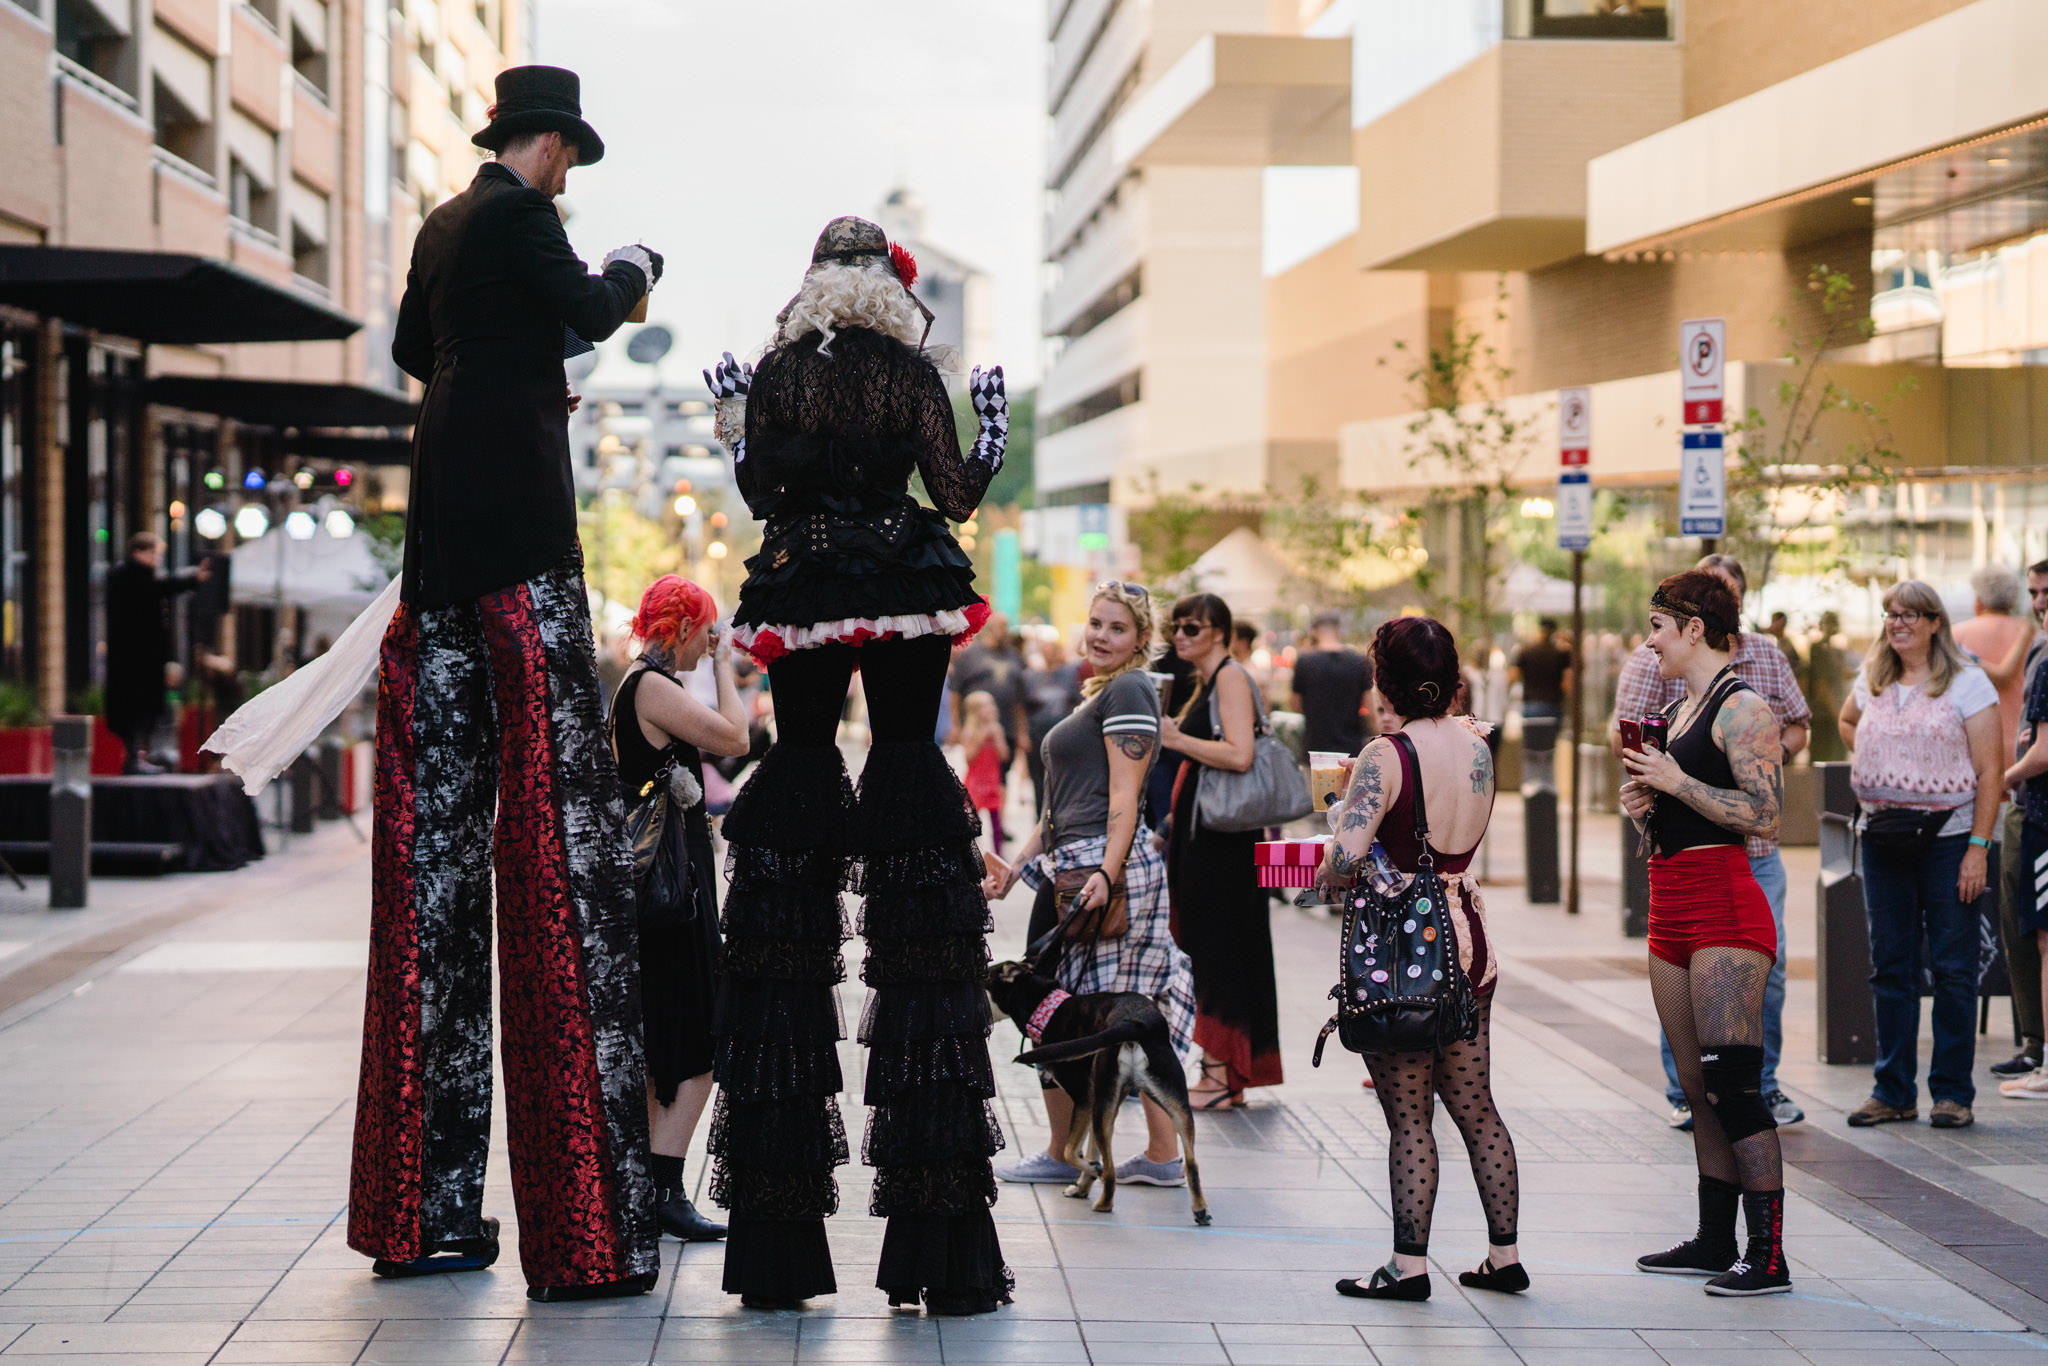 Two buskers/street performers on stilts interacting with the audience